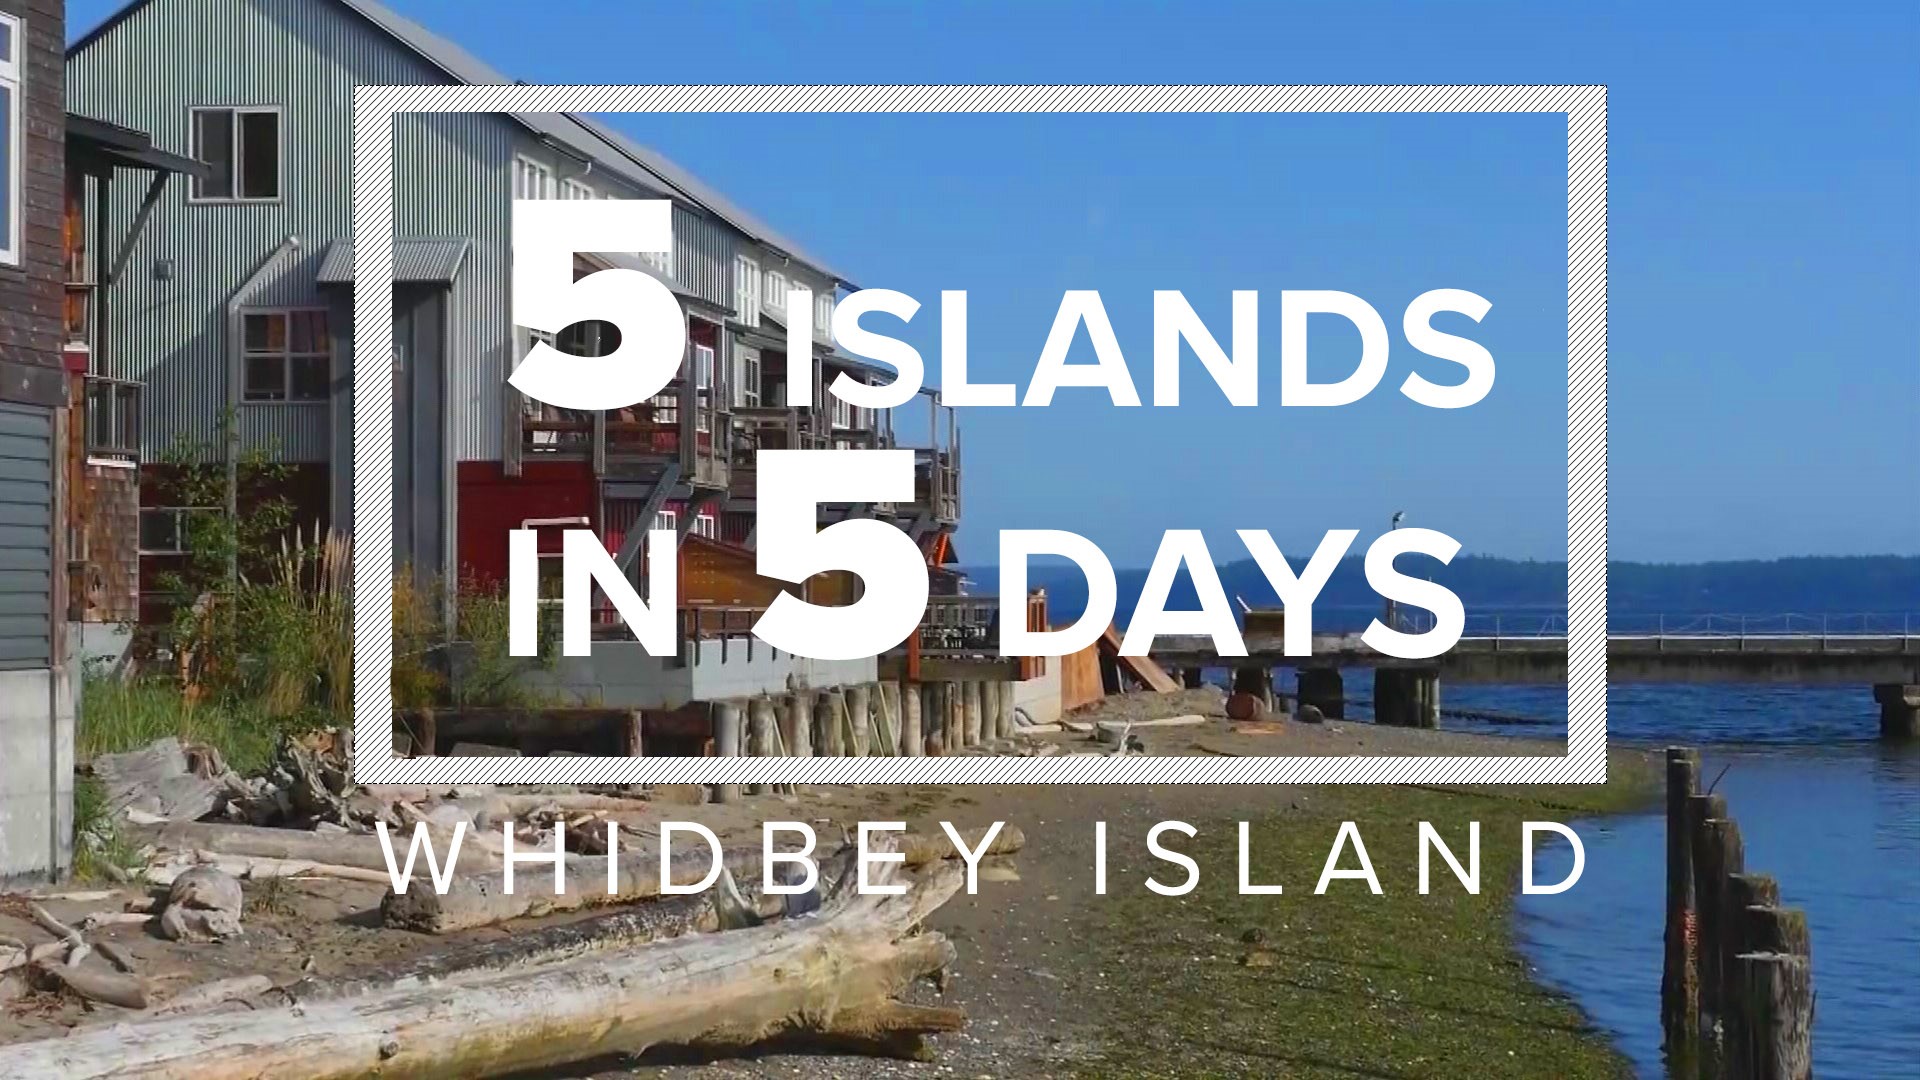 Mimi and Jake head west to explore Whidbey Island, the fourth largest island in the lower 48 states.